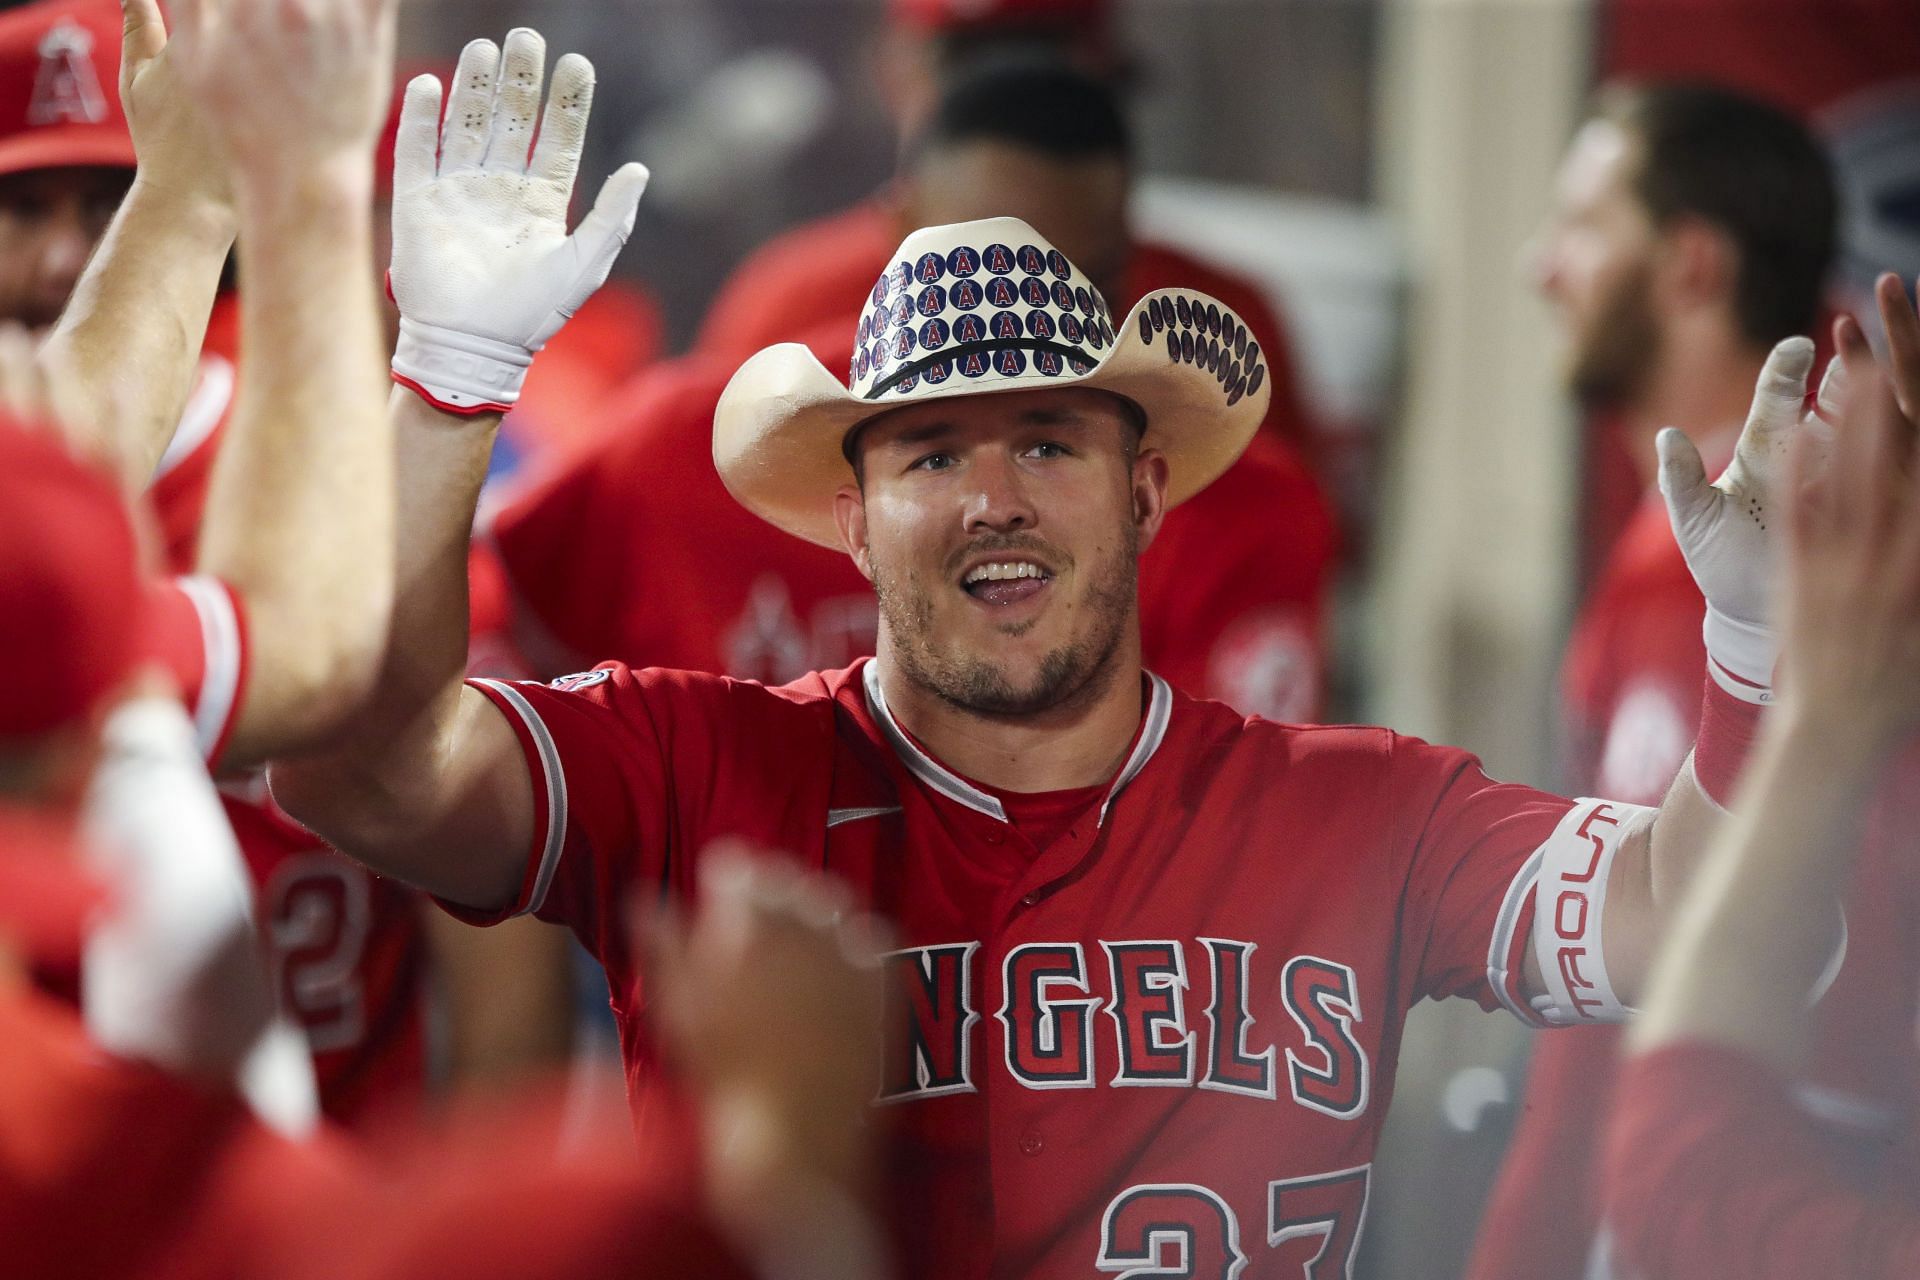 Mike Trout: 'It's always good to come back home' …, by MLB.com/blogs